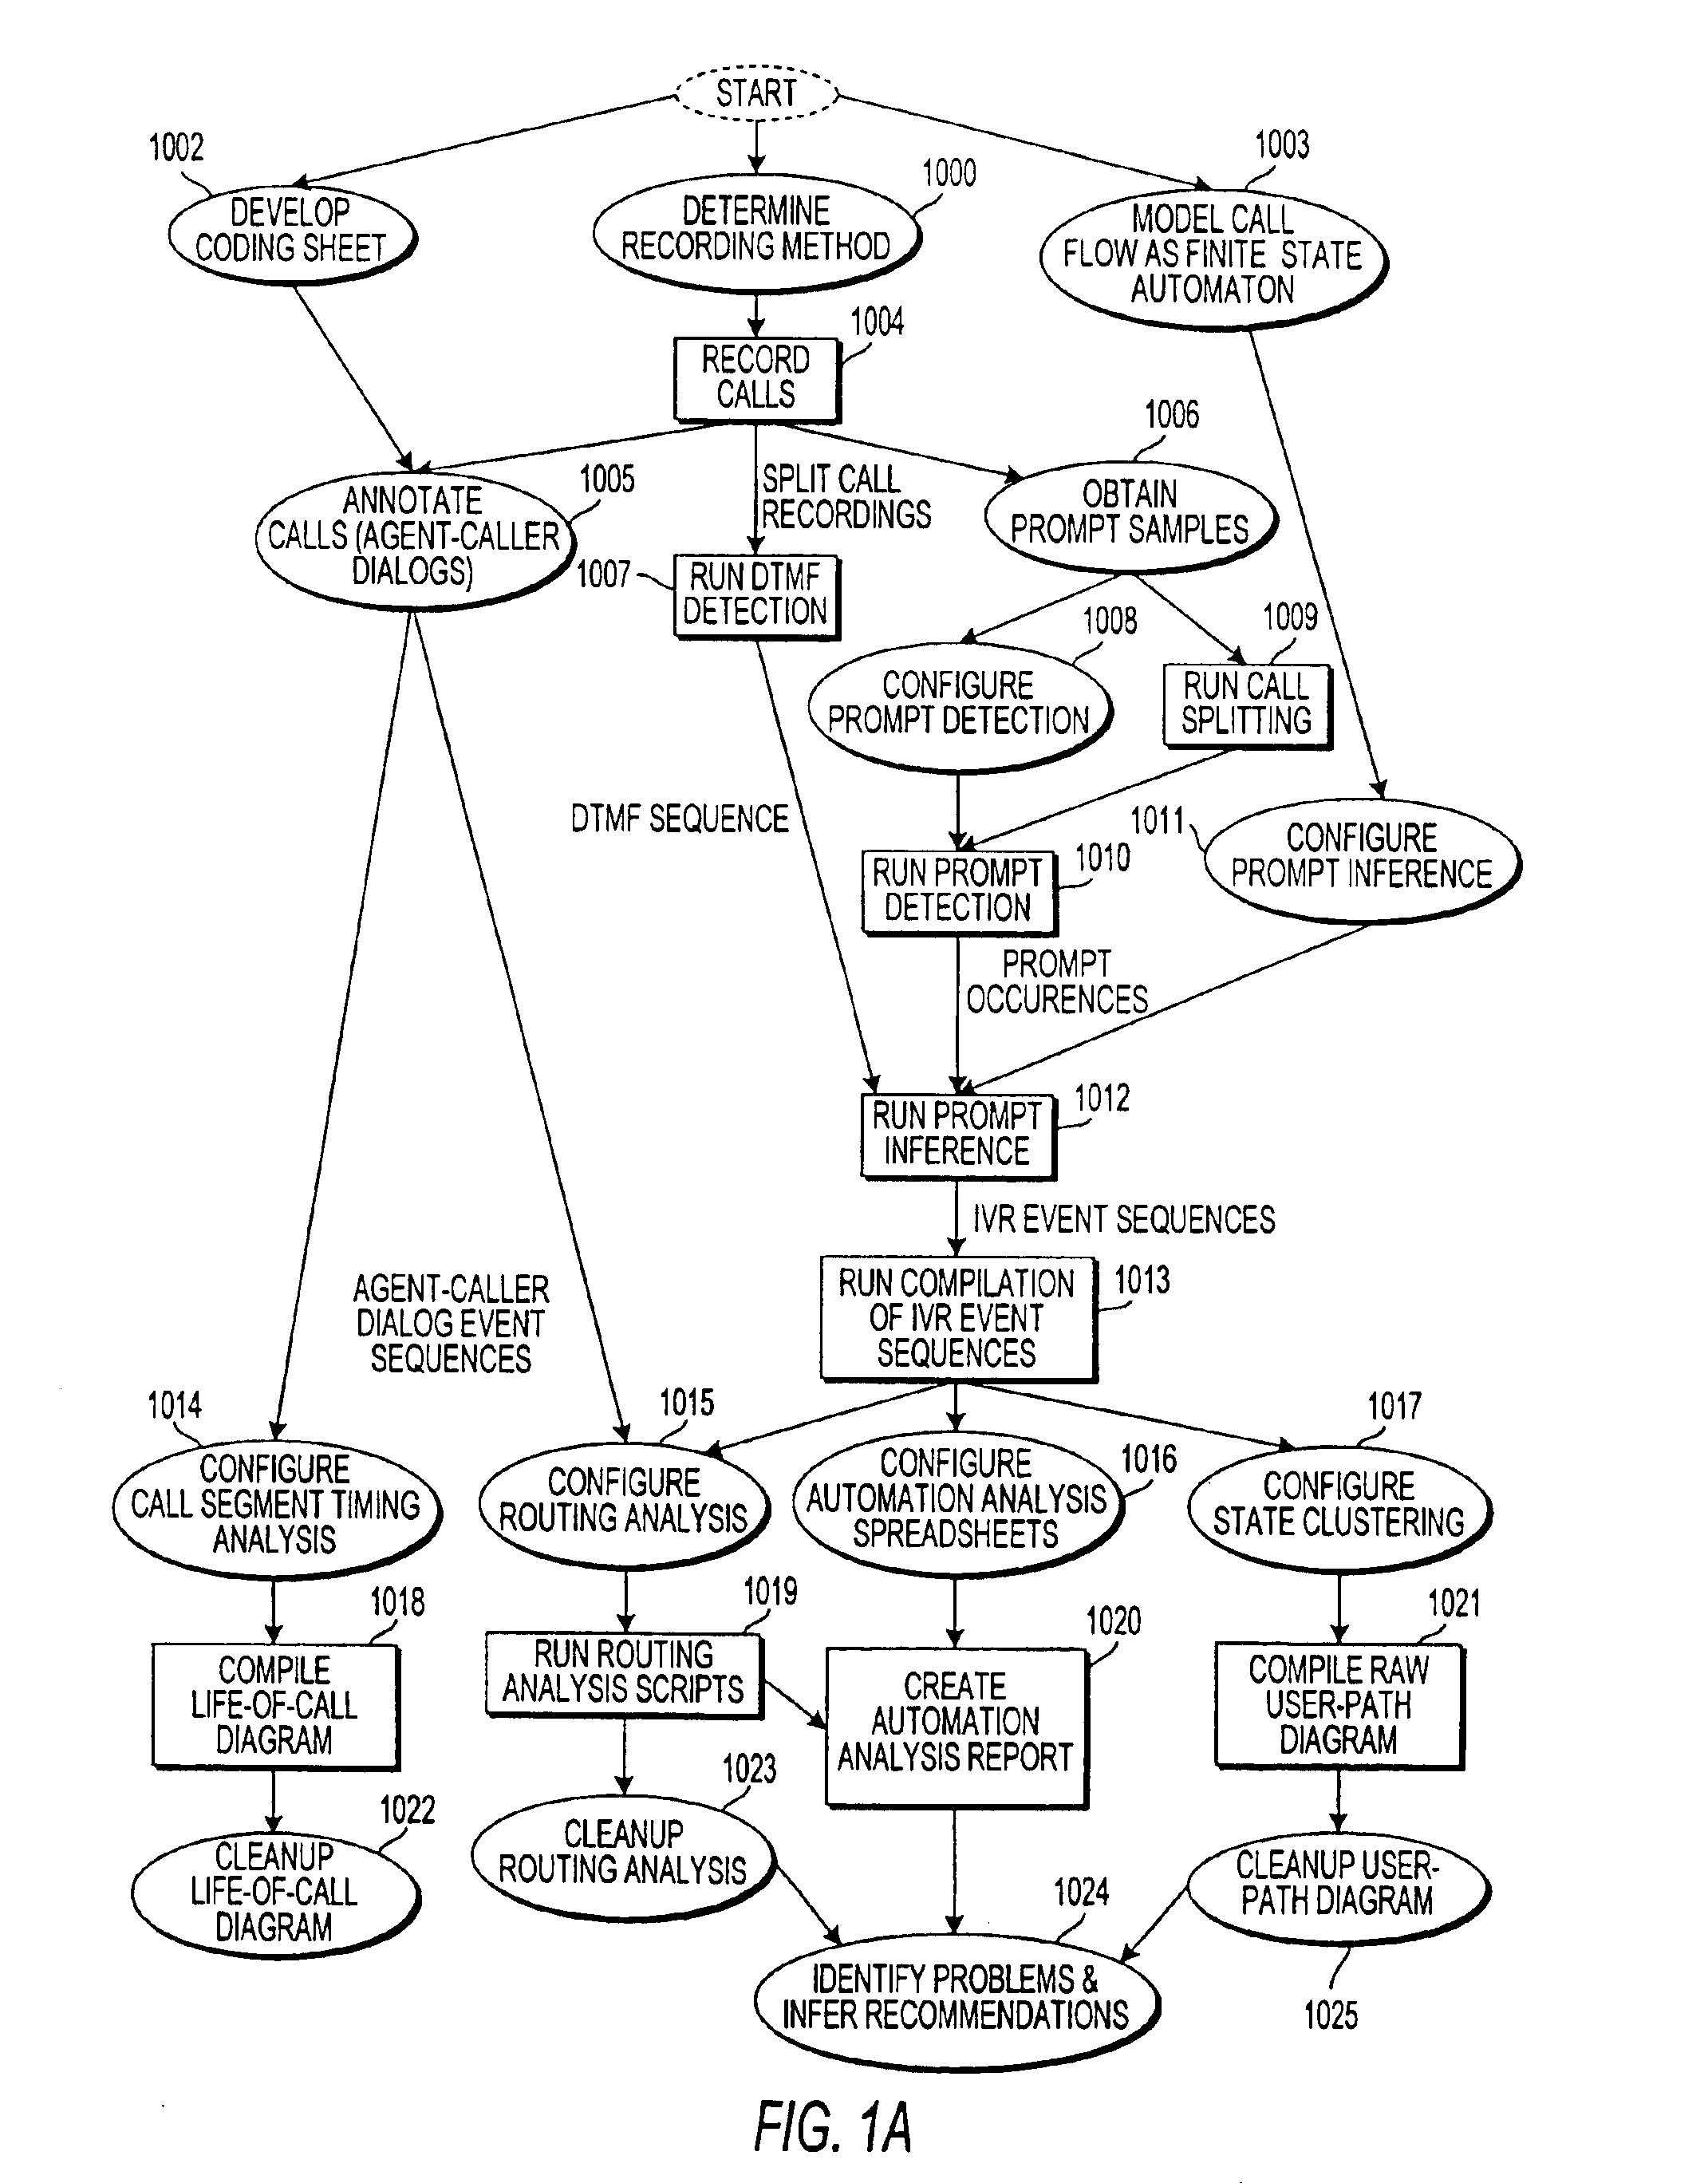 System and method for assessing a call center